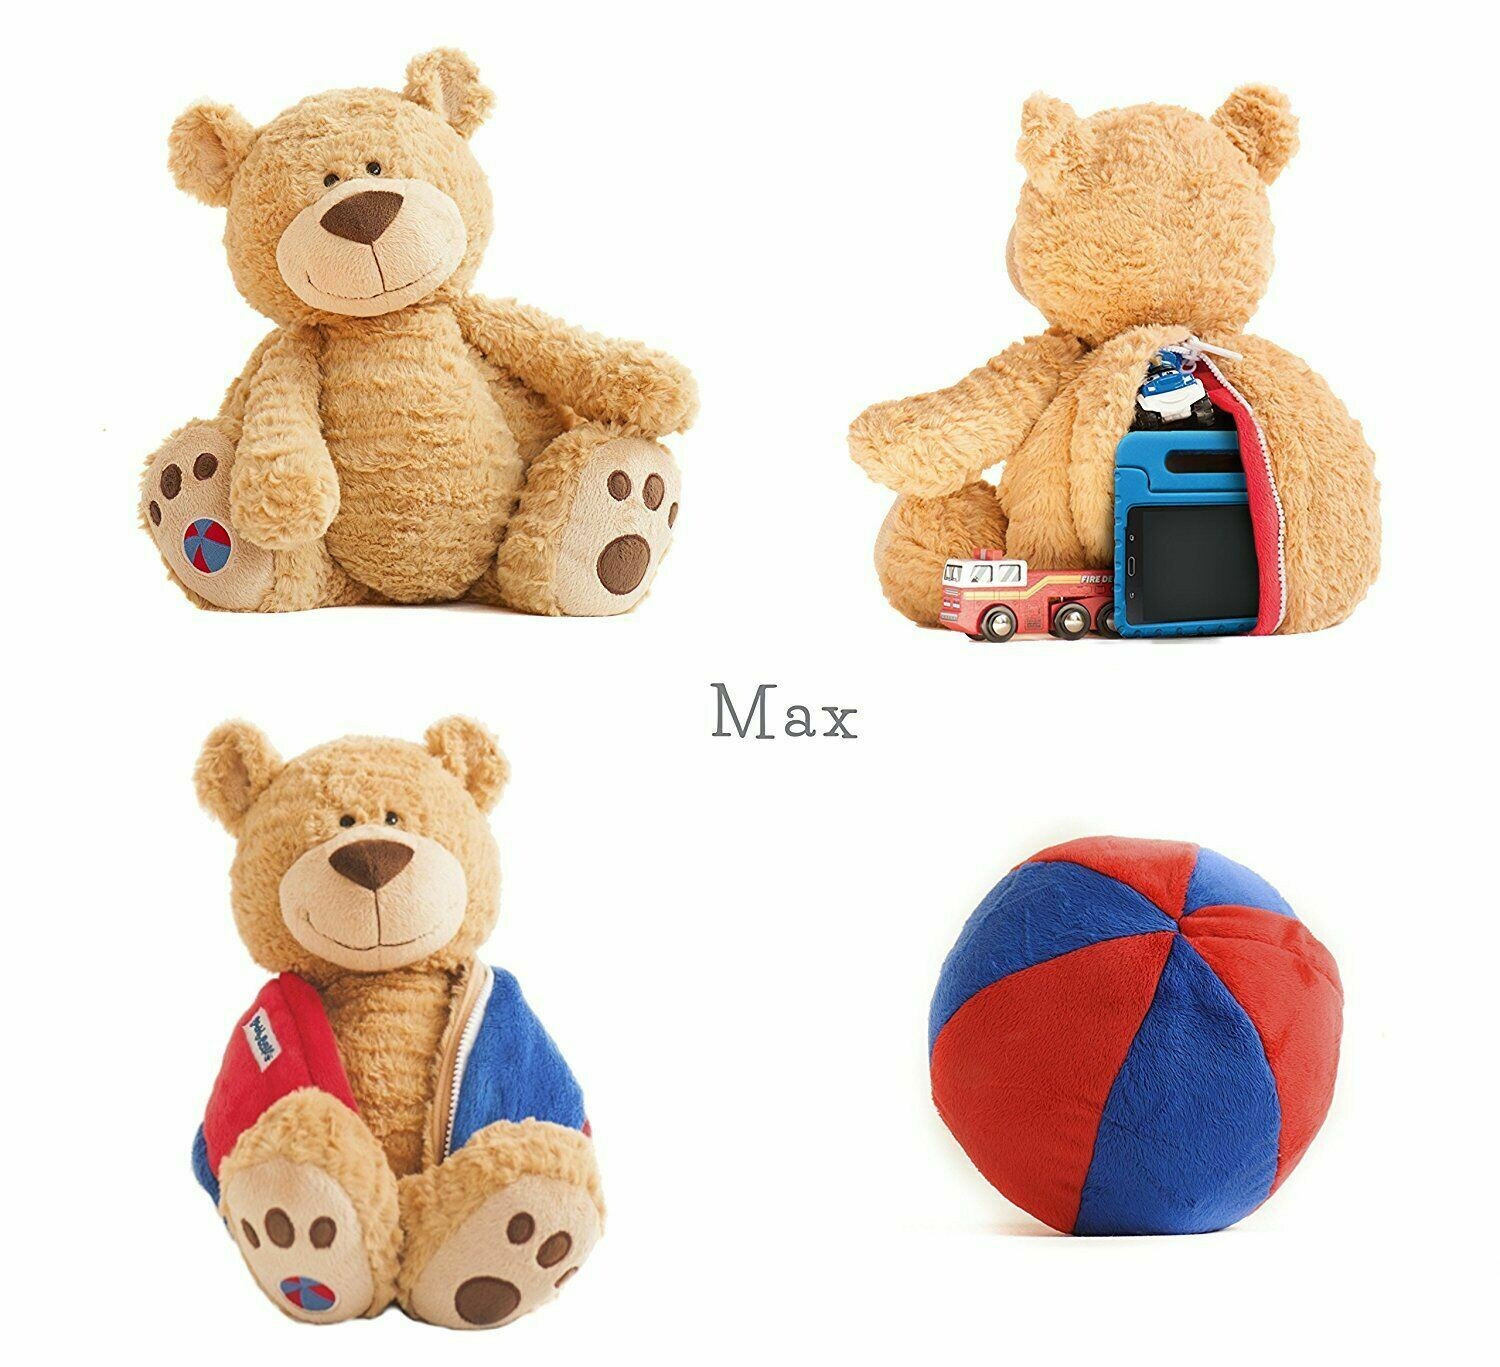 SALE: Max Buddy Ball - Red/Blue - org. $12.99